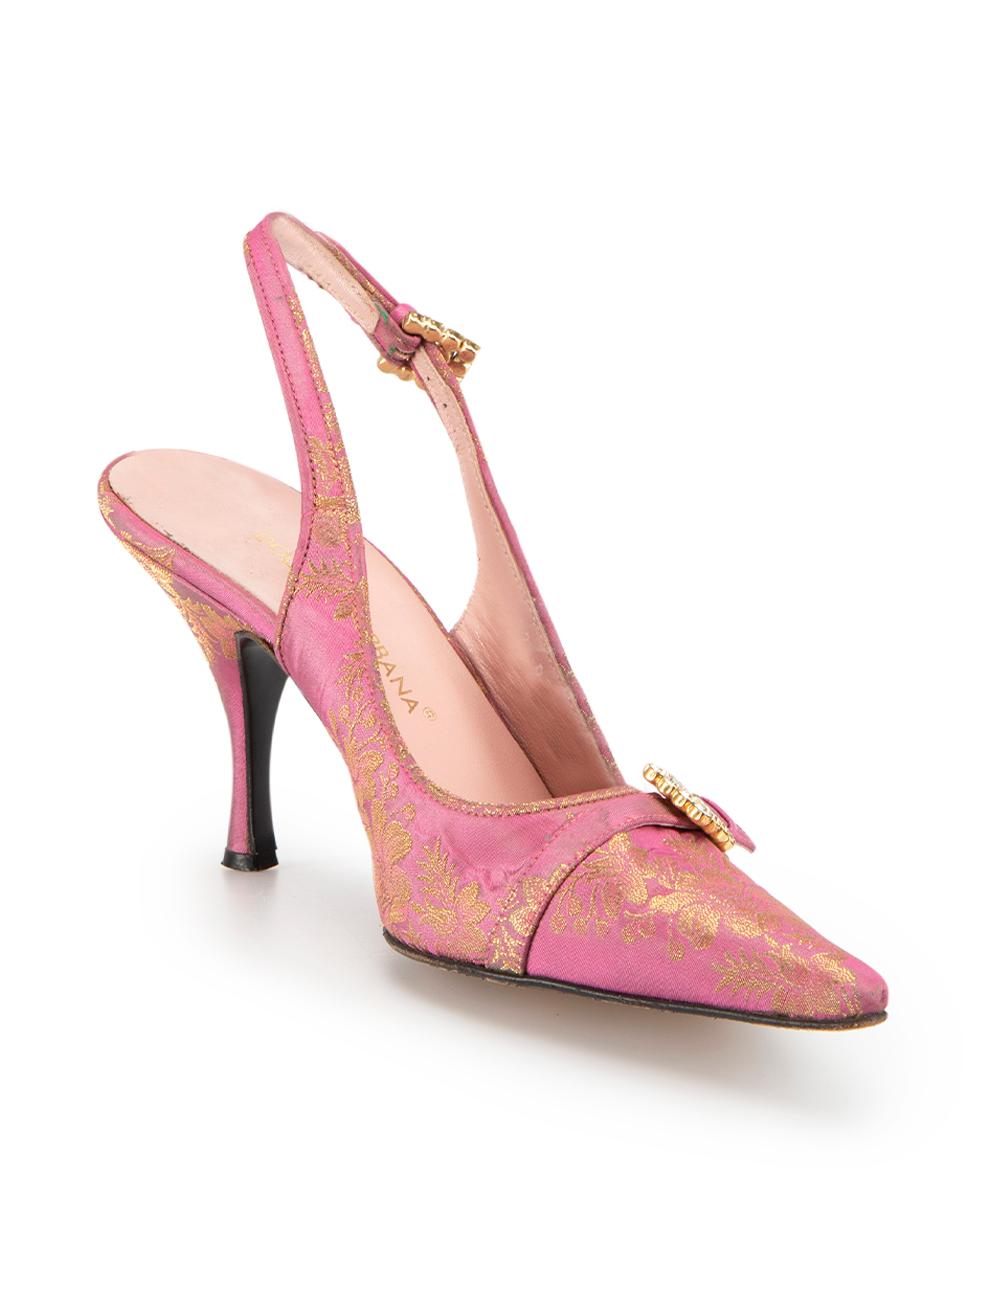 CONDITION is Good. General wear to shoes is evident. Small marks, moderate signs of creasing and scuffing found throughout the upper and on the sole of this used Dolce & Gabbana designer resale item.



Details


Vintage

Pink

Cloth

Mid